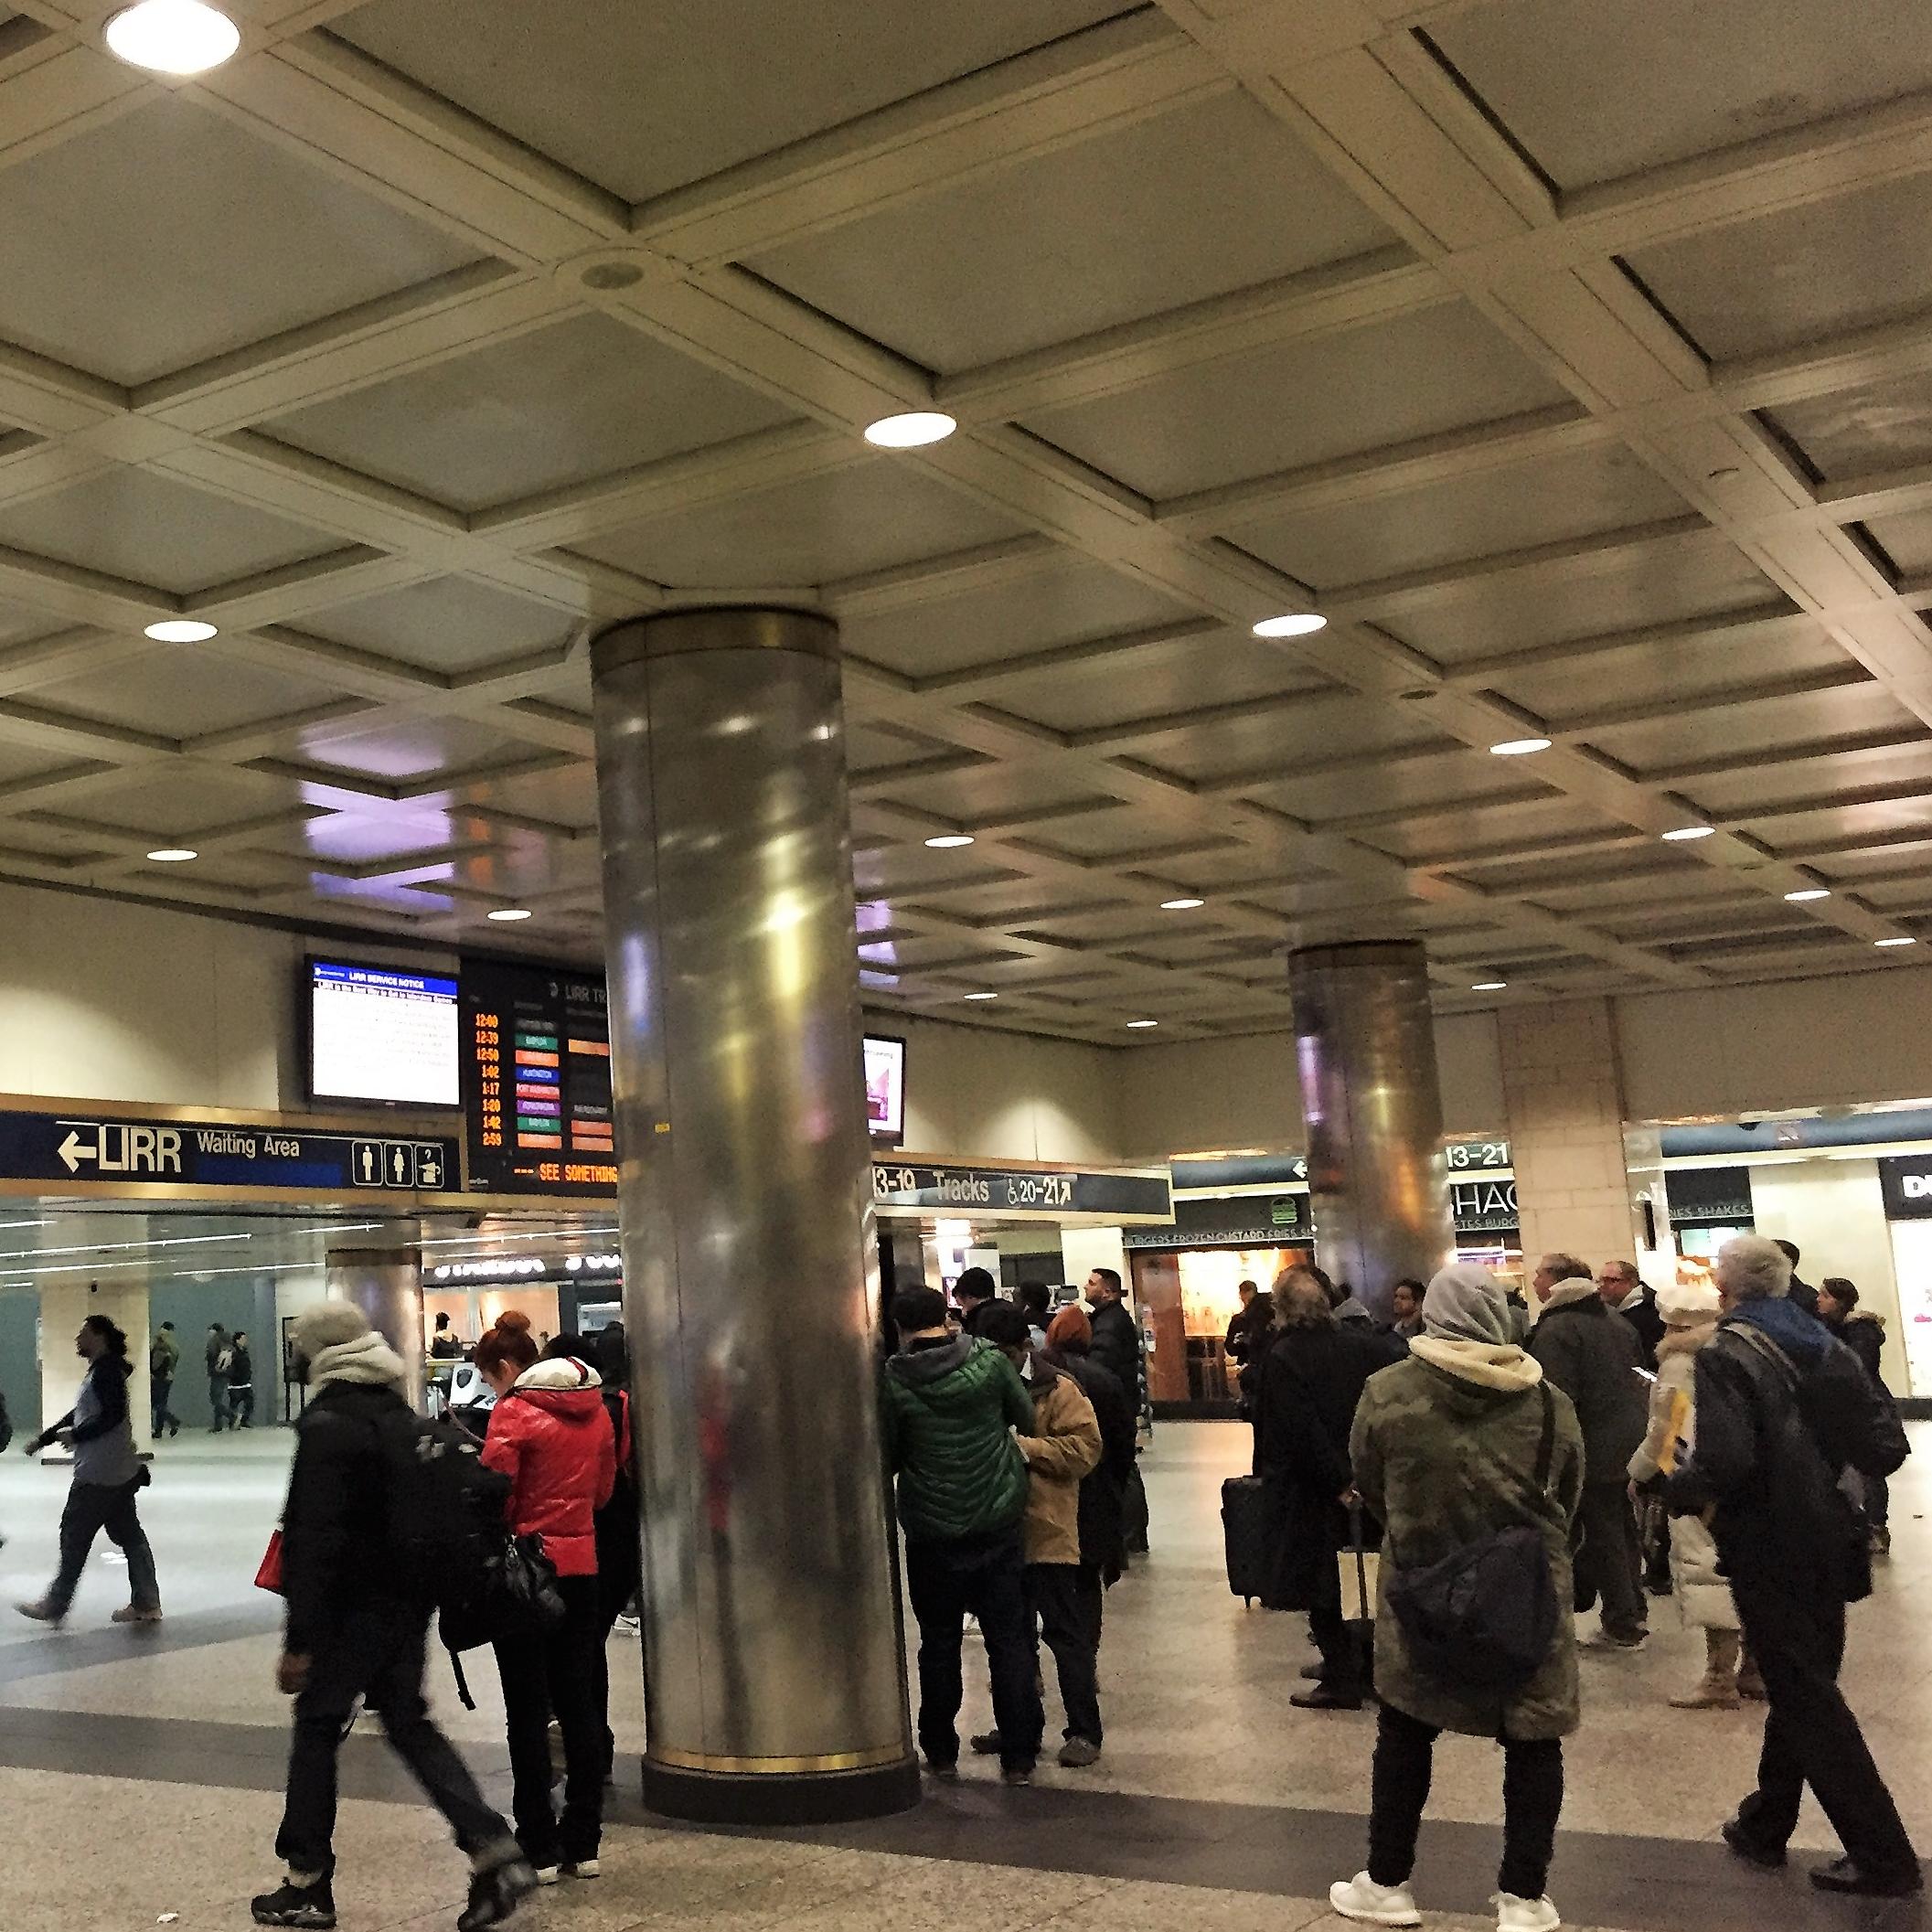 After midnight on February 7, Touro Graduate School of Social Work students canvassed the area around Penn station as part of New York City's annual count of the homeless population.